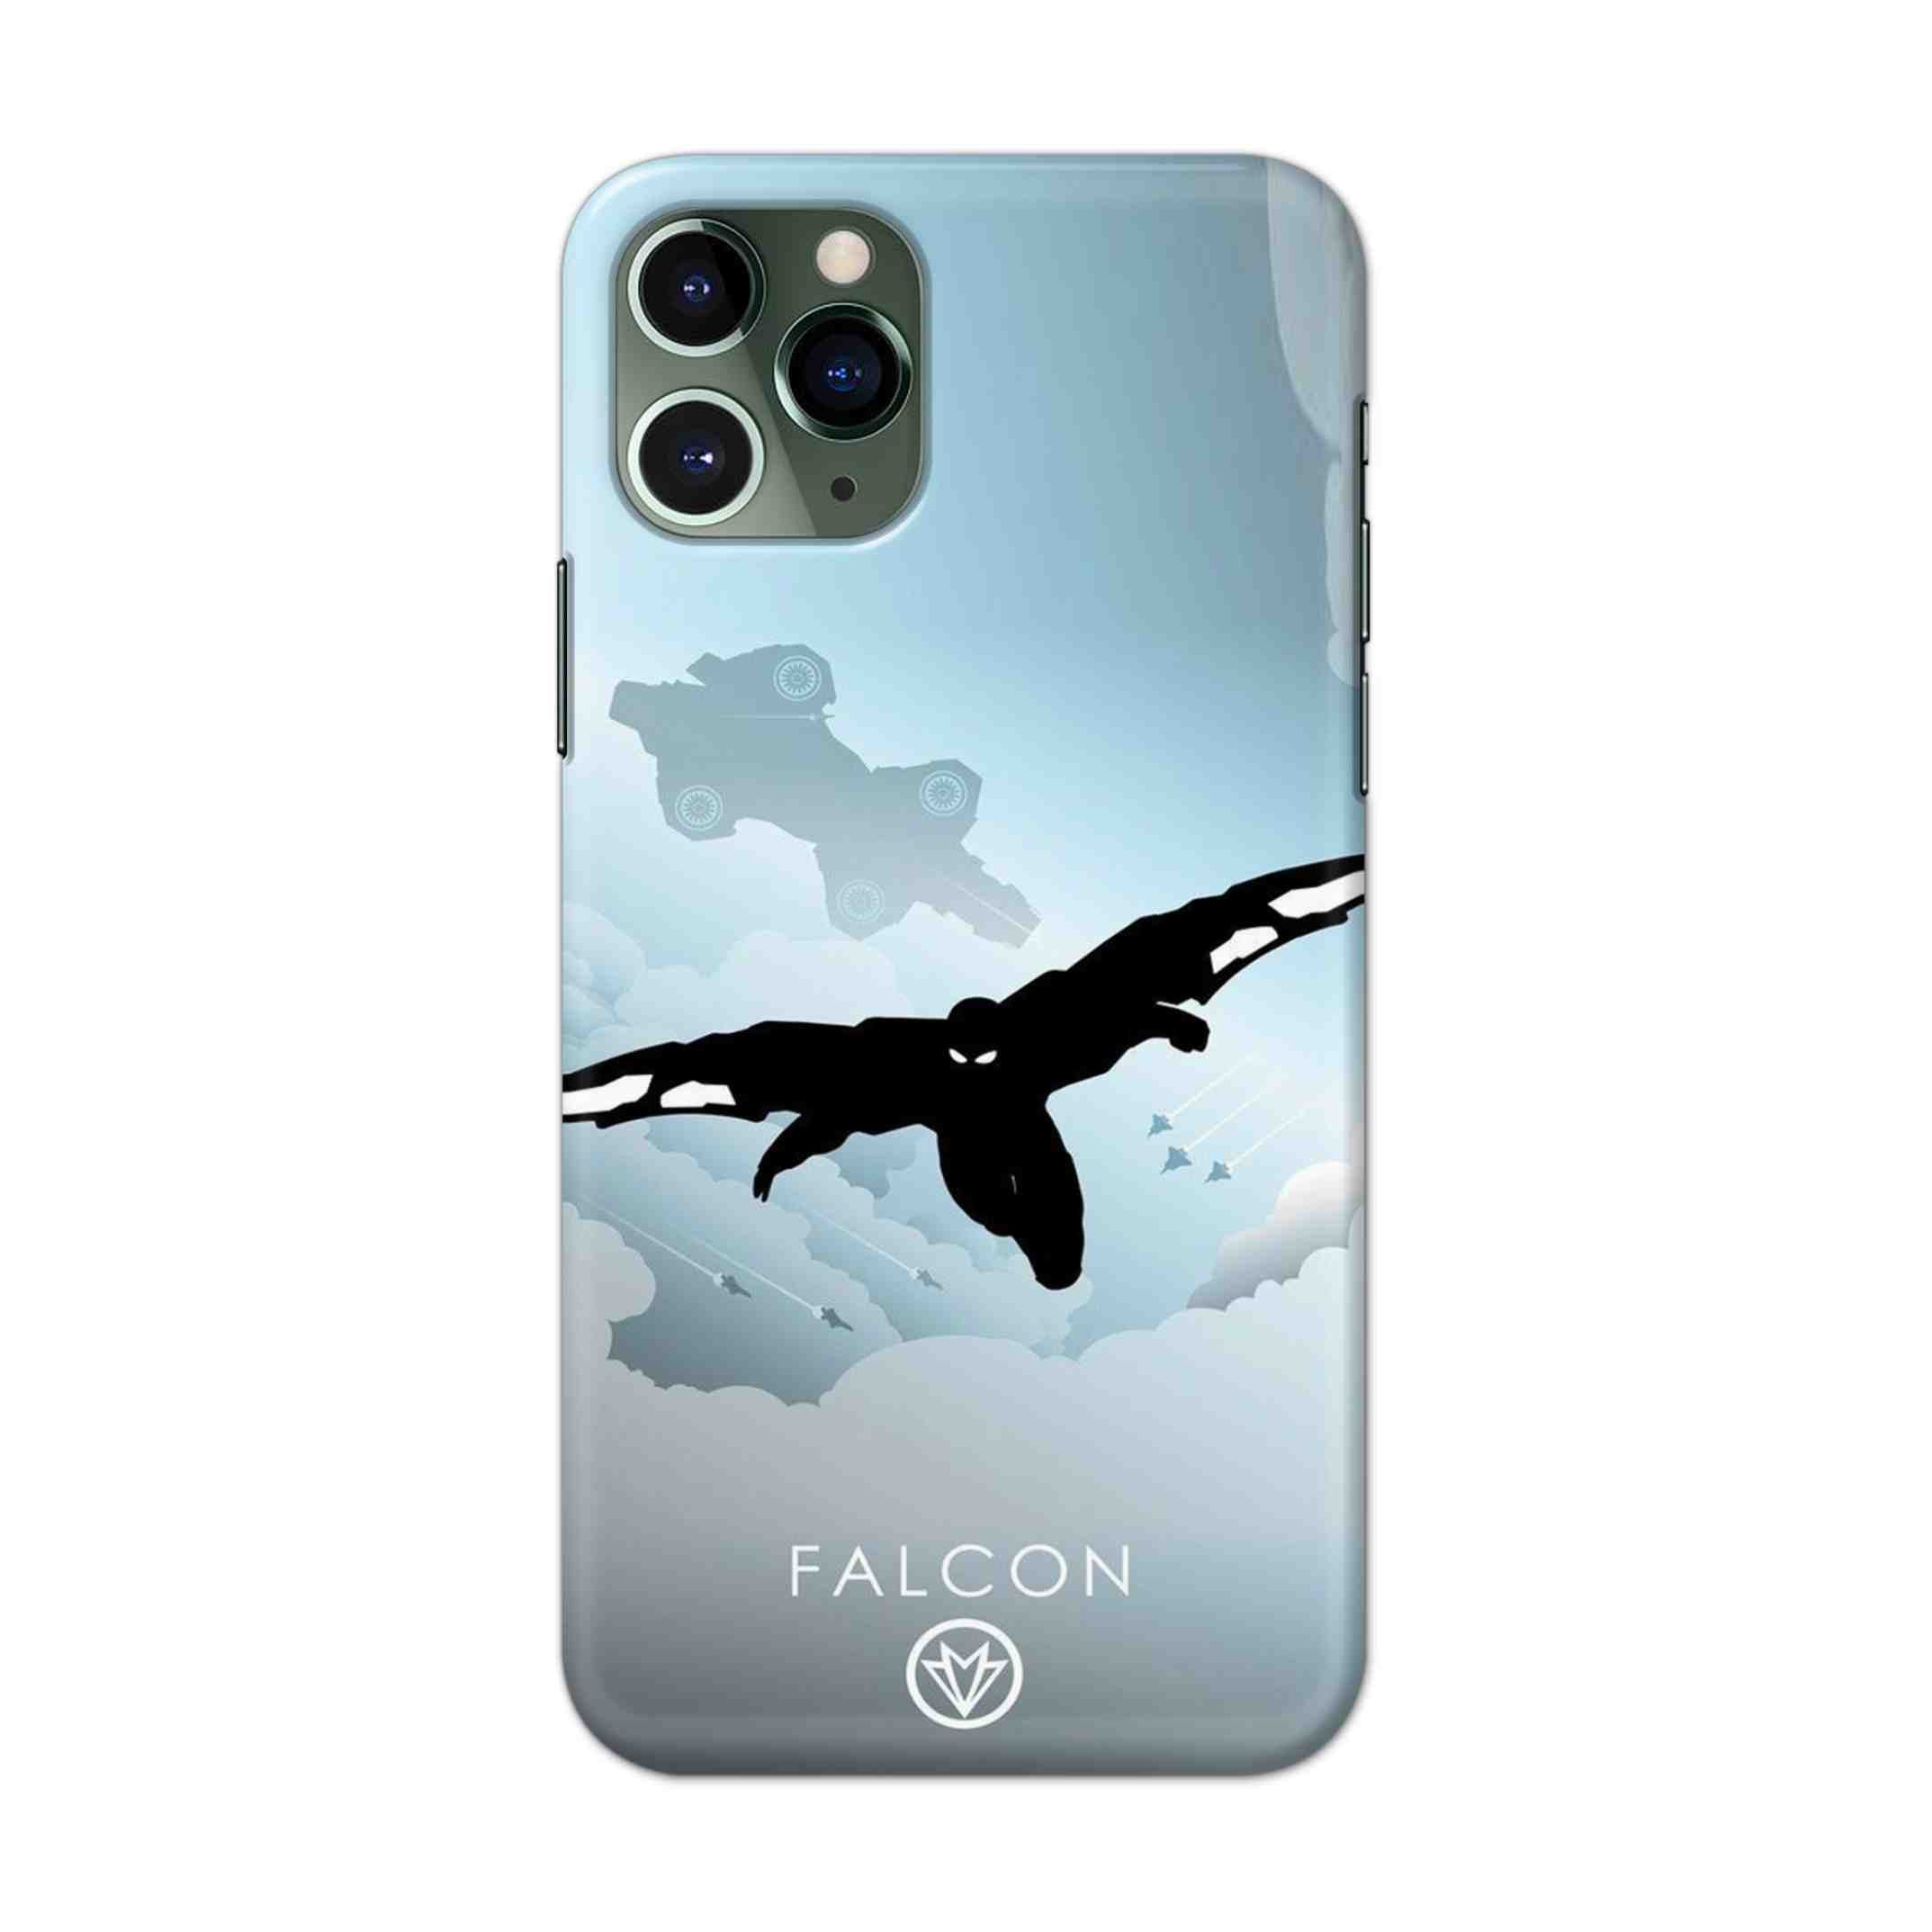 Buy Falcon Hard Back Mobile Phone Case/Cover For iPhone 11 Pro Online